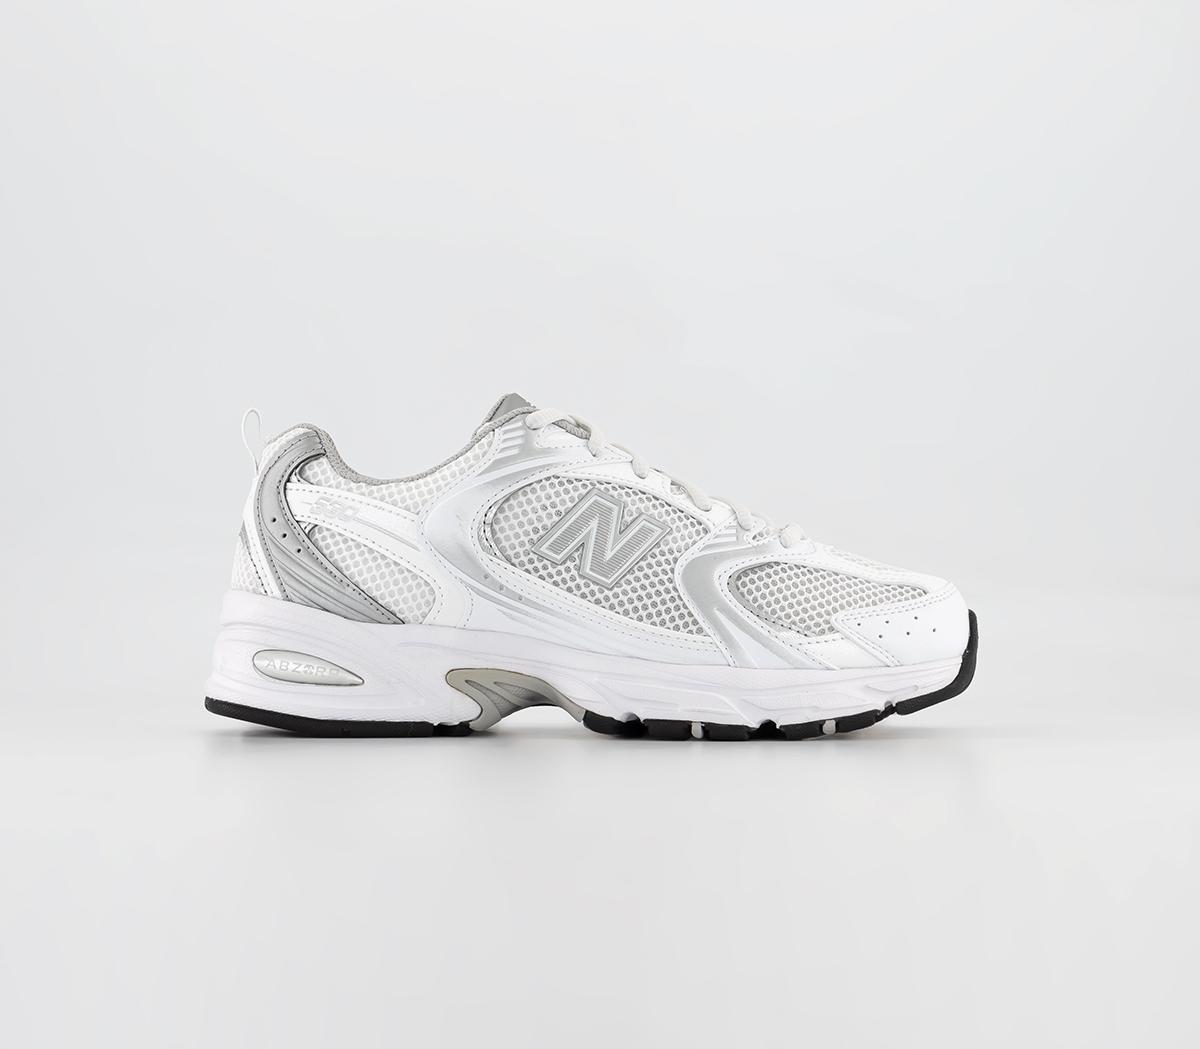 New Balance Mr530 Trainers White Silver - Women's Trainers